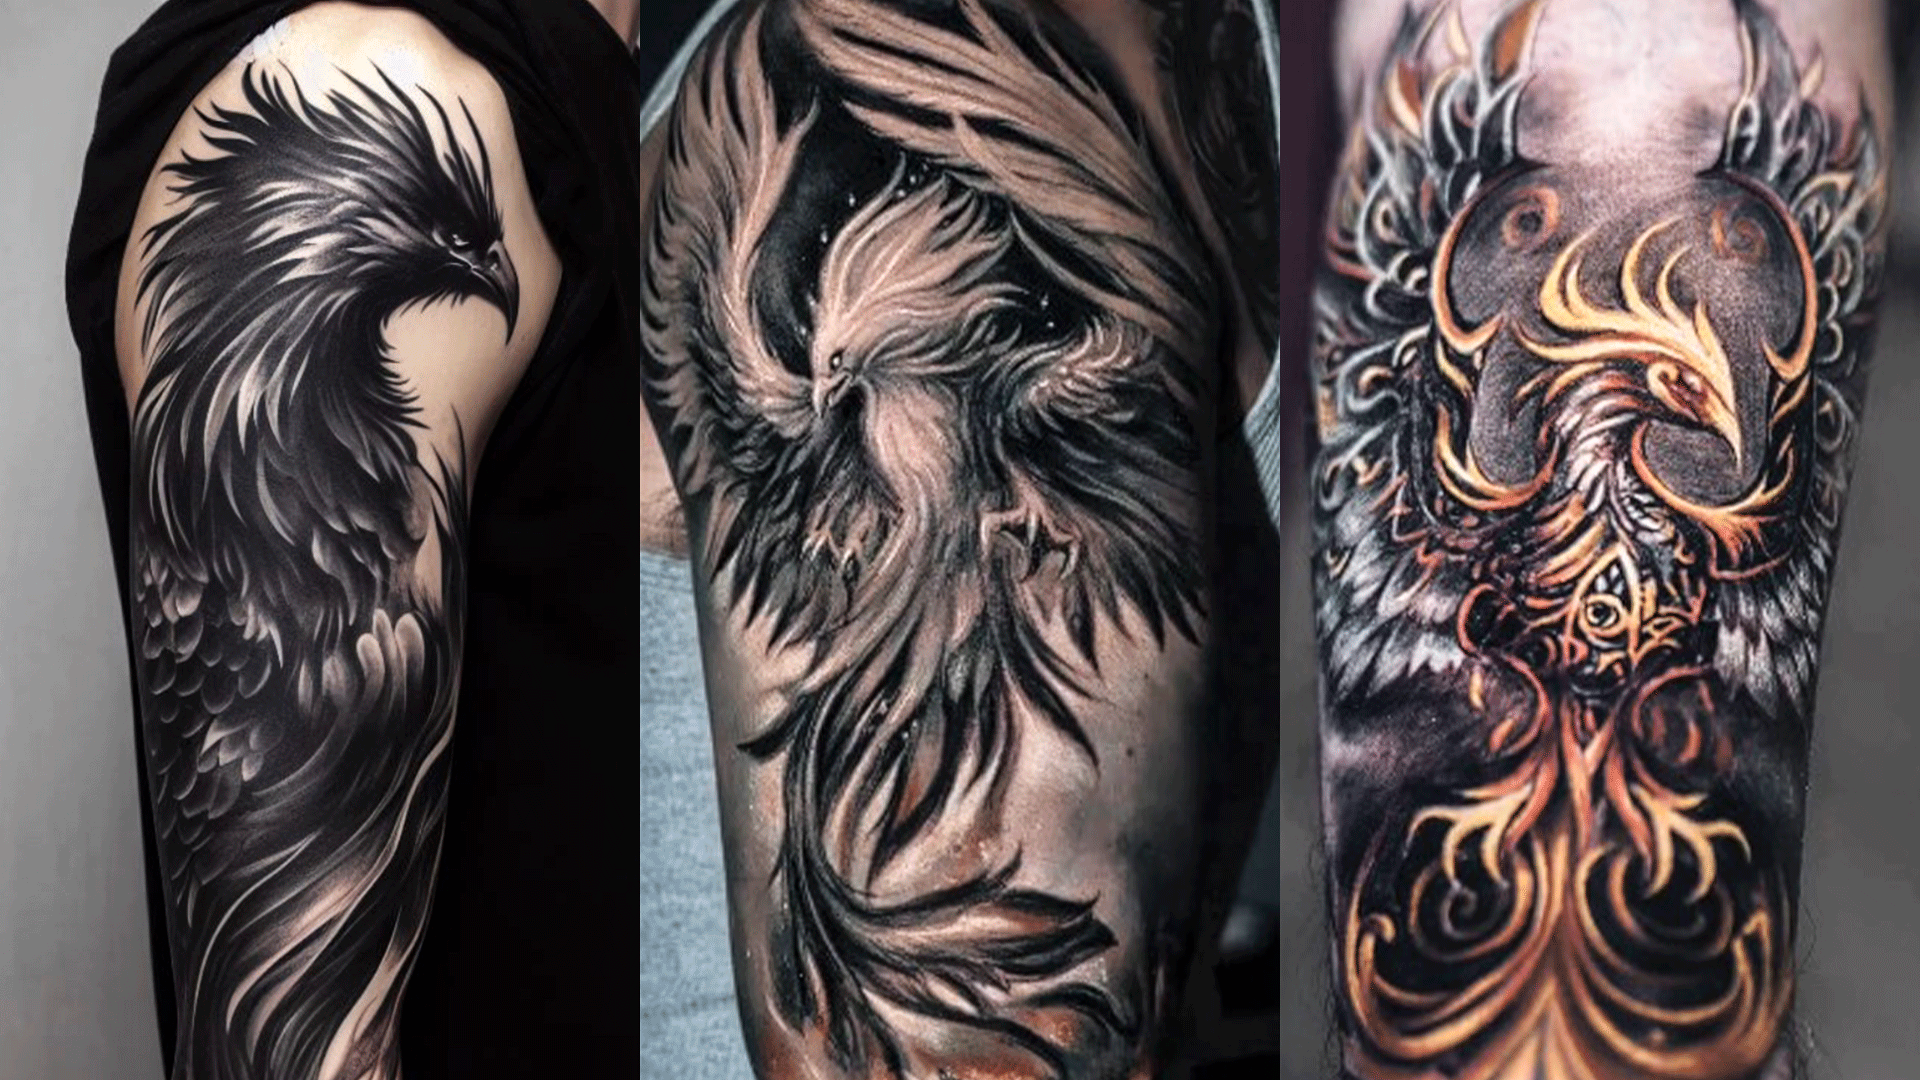 What does a Phoenix tattoo mean? - Quora